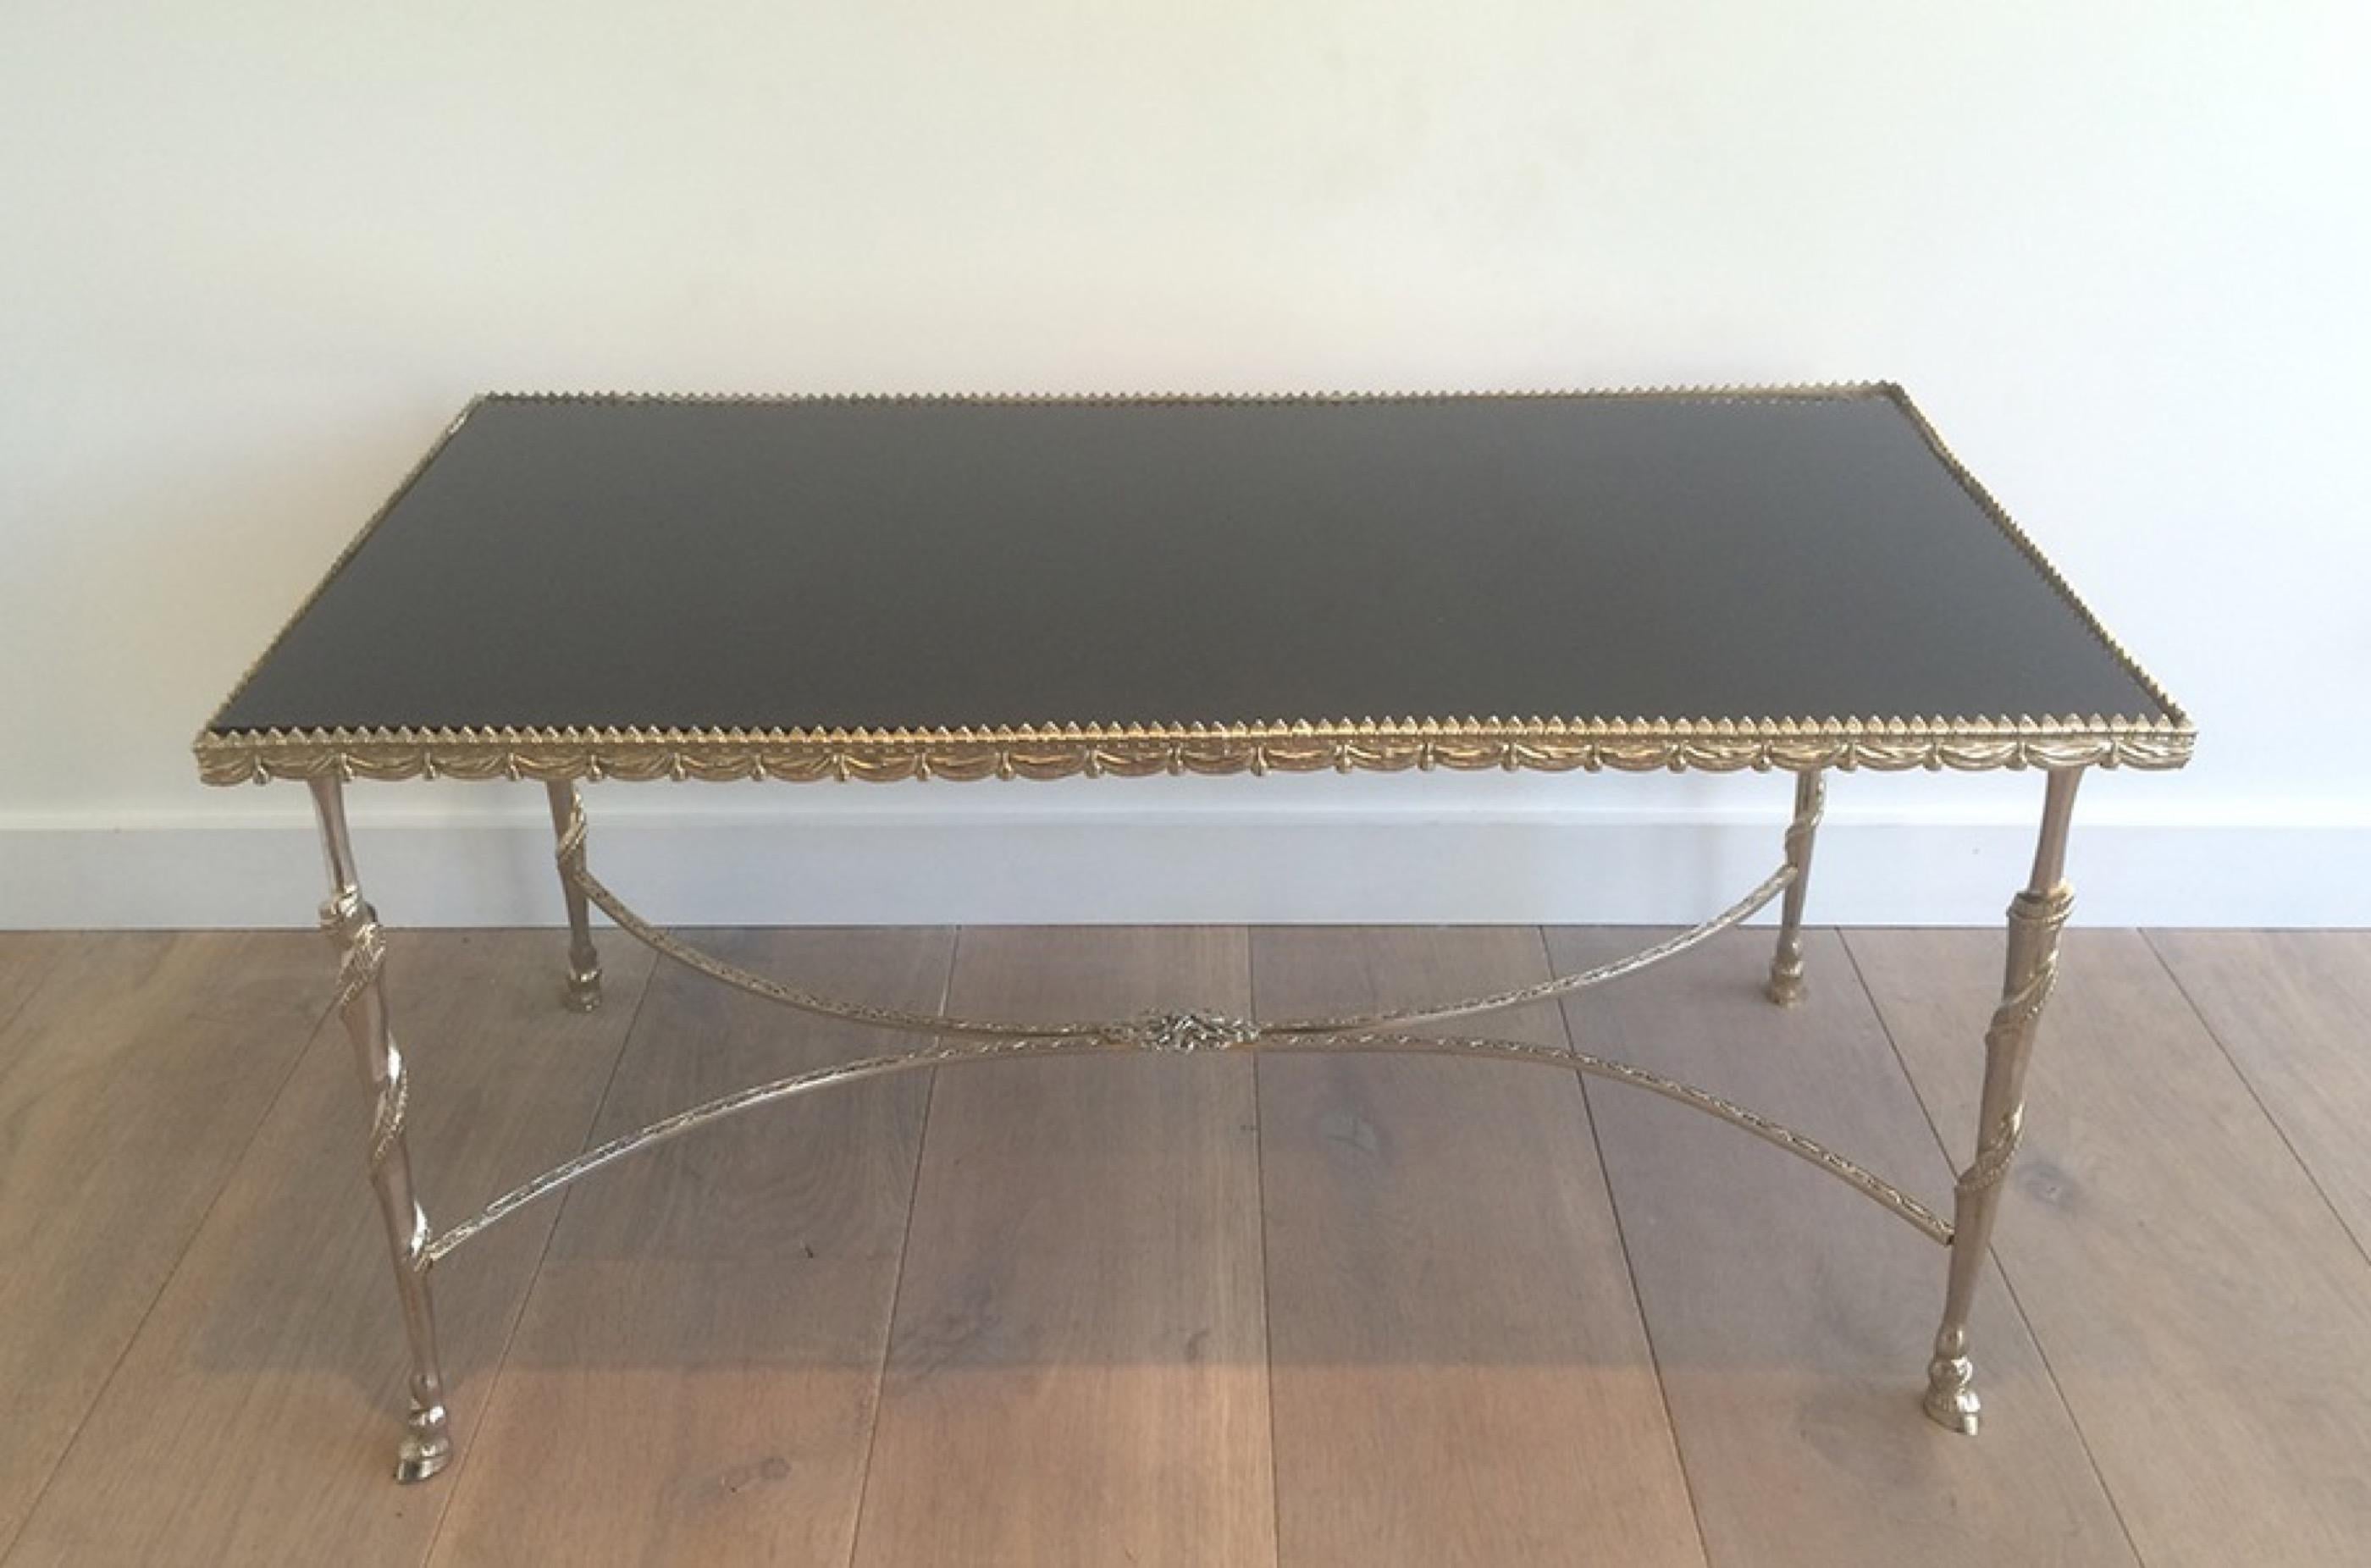 This very nice coffee table is made of a silver base with ribbons and animal feet and with a crown all around the top. The top of the cocktail table is made of a black lacquered glass top. This is a French work in the style of Maison Jansen, circa